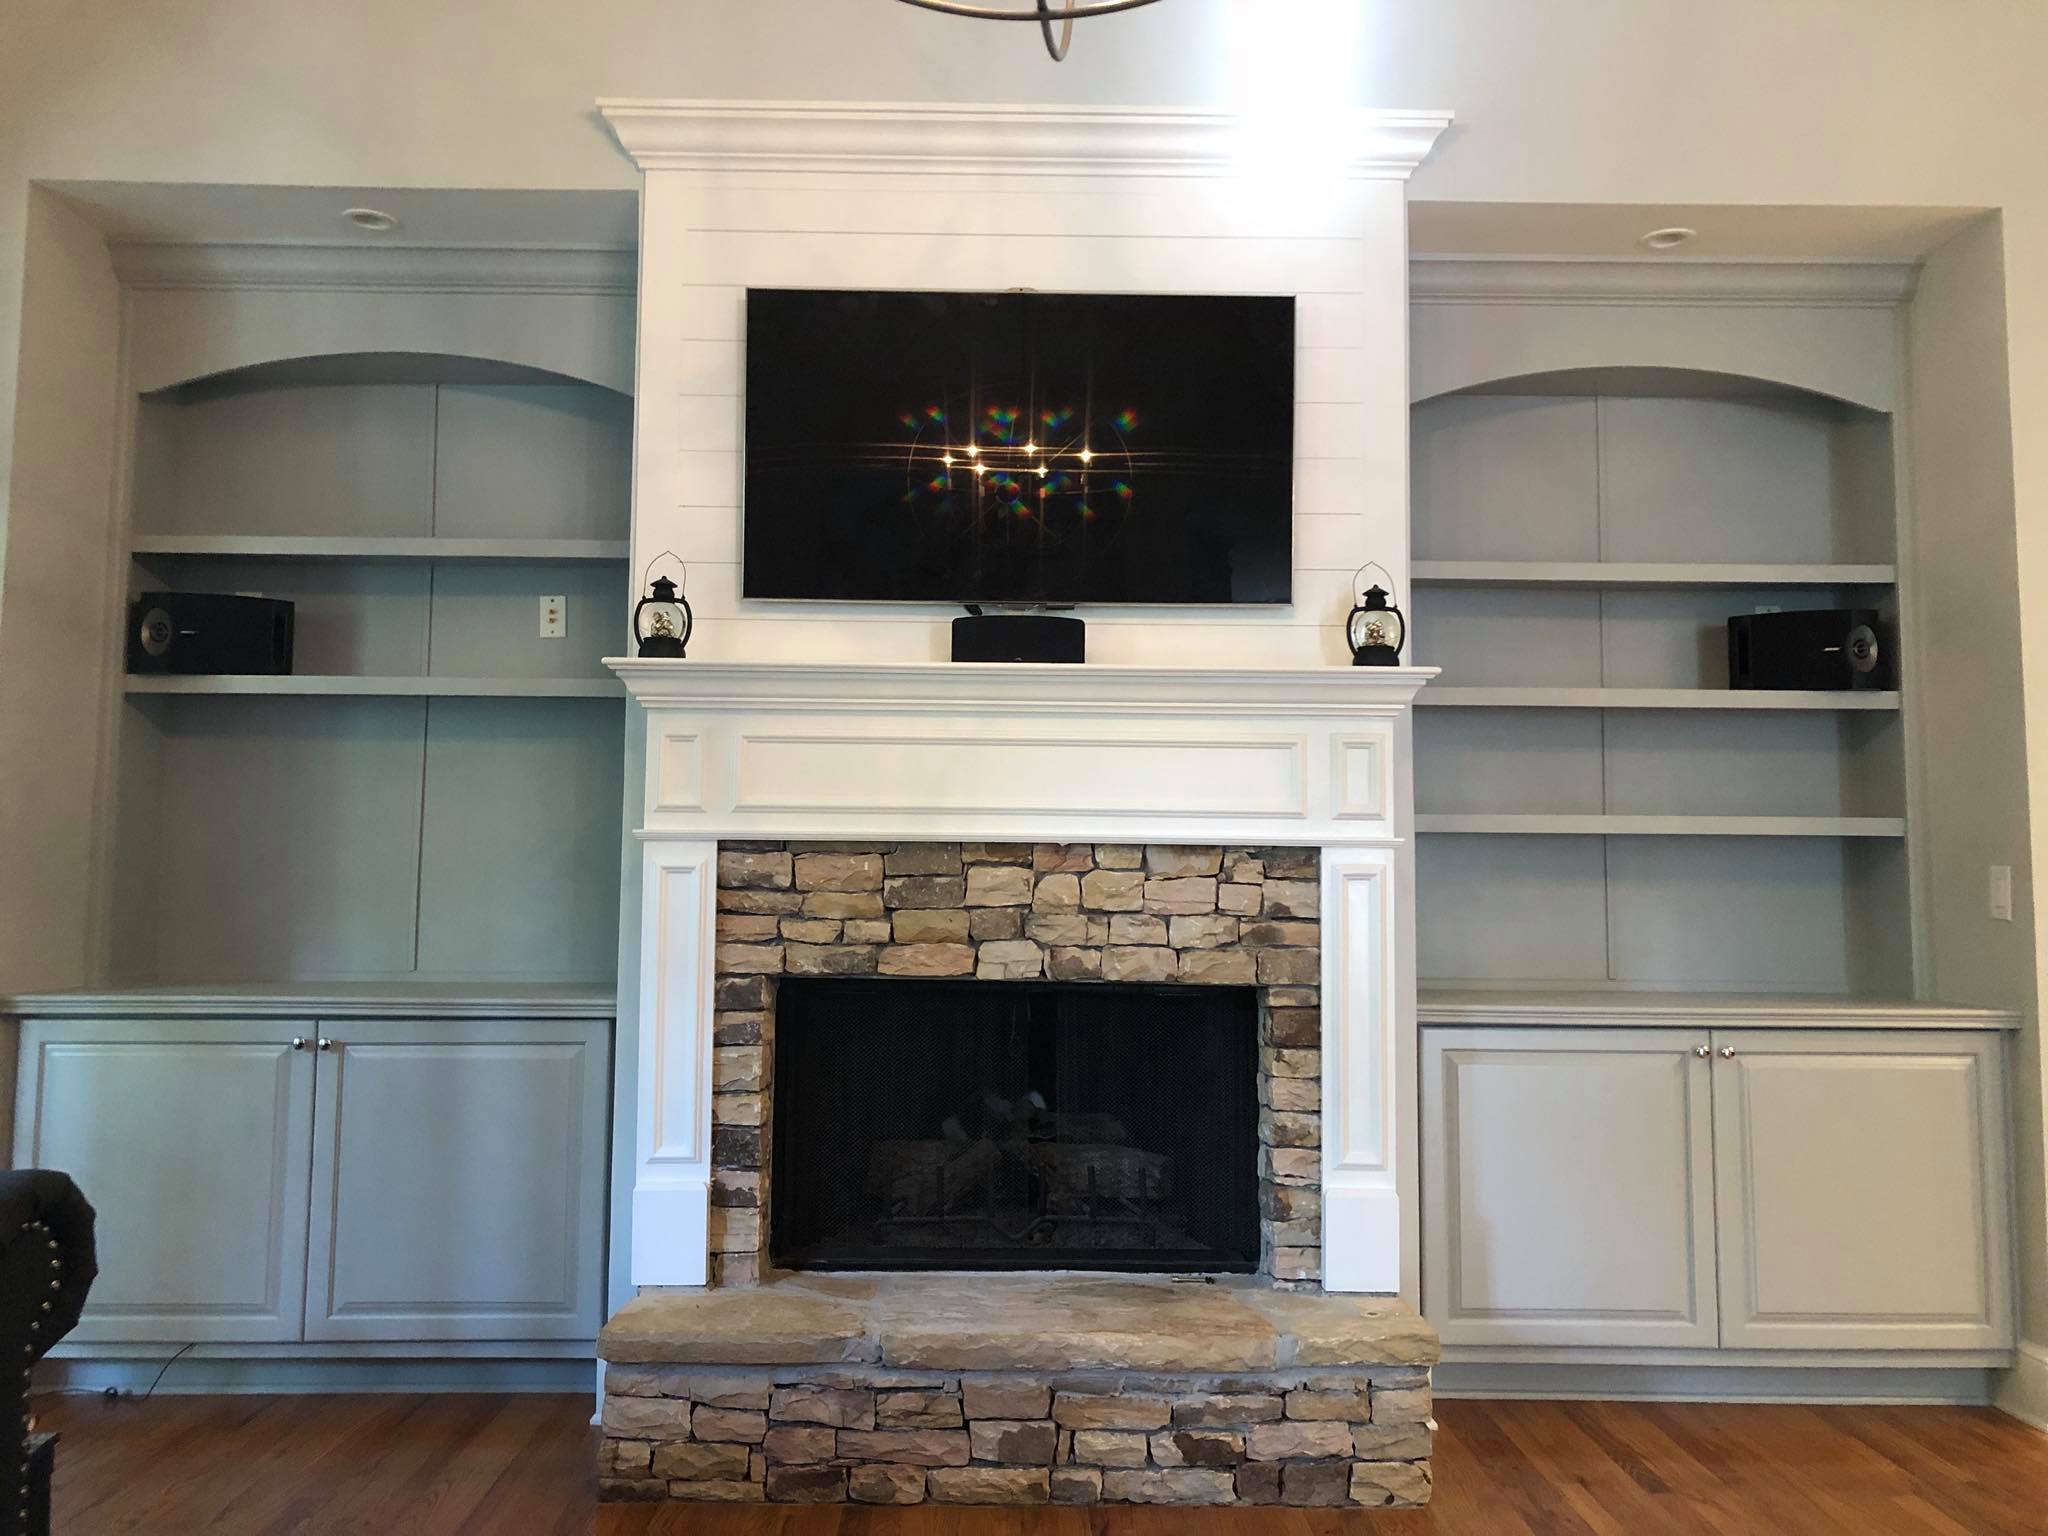 Complete Built in Fireplace Cabinets Painting and Refinishing with Custom Painted Trim